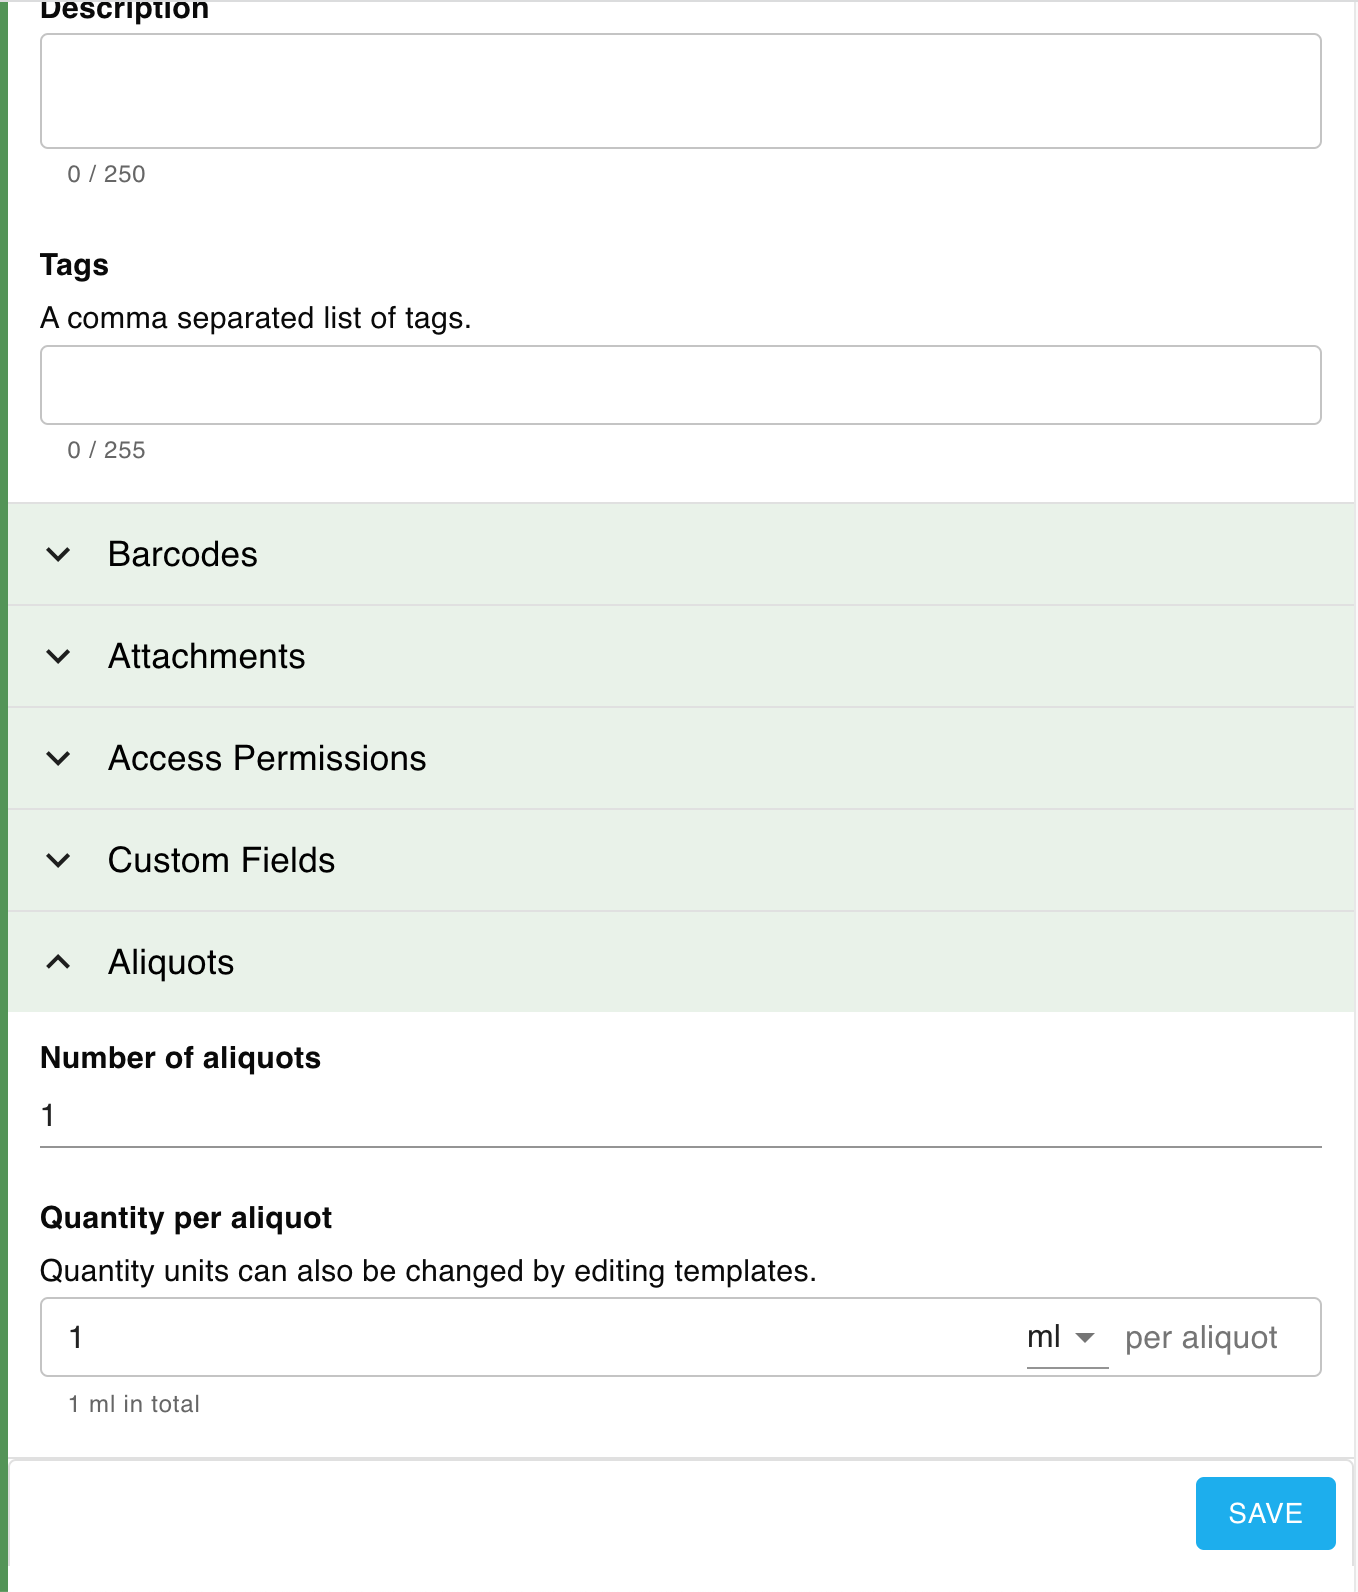 Screenshot of the new sample form, showing the fields Description, Tags, Number of Aliquots, and Quantity per aliquot. The save button is also shown.